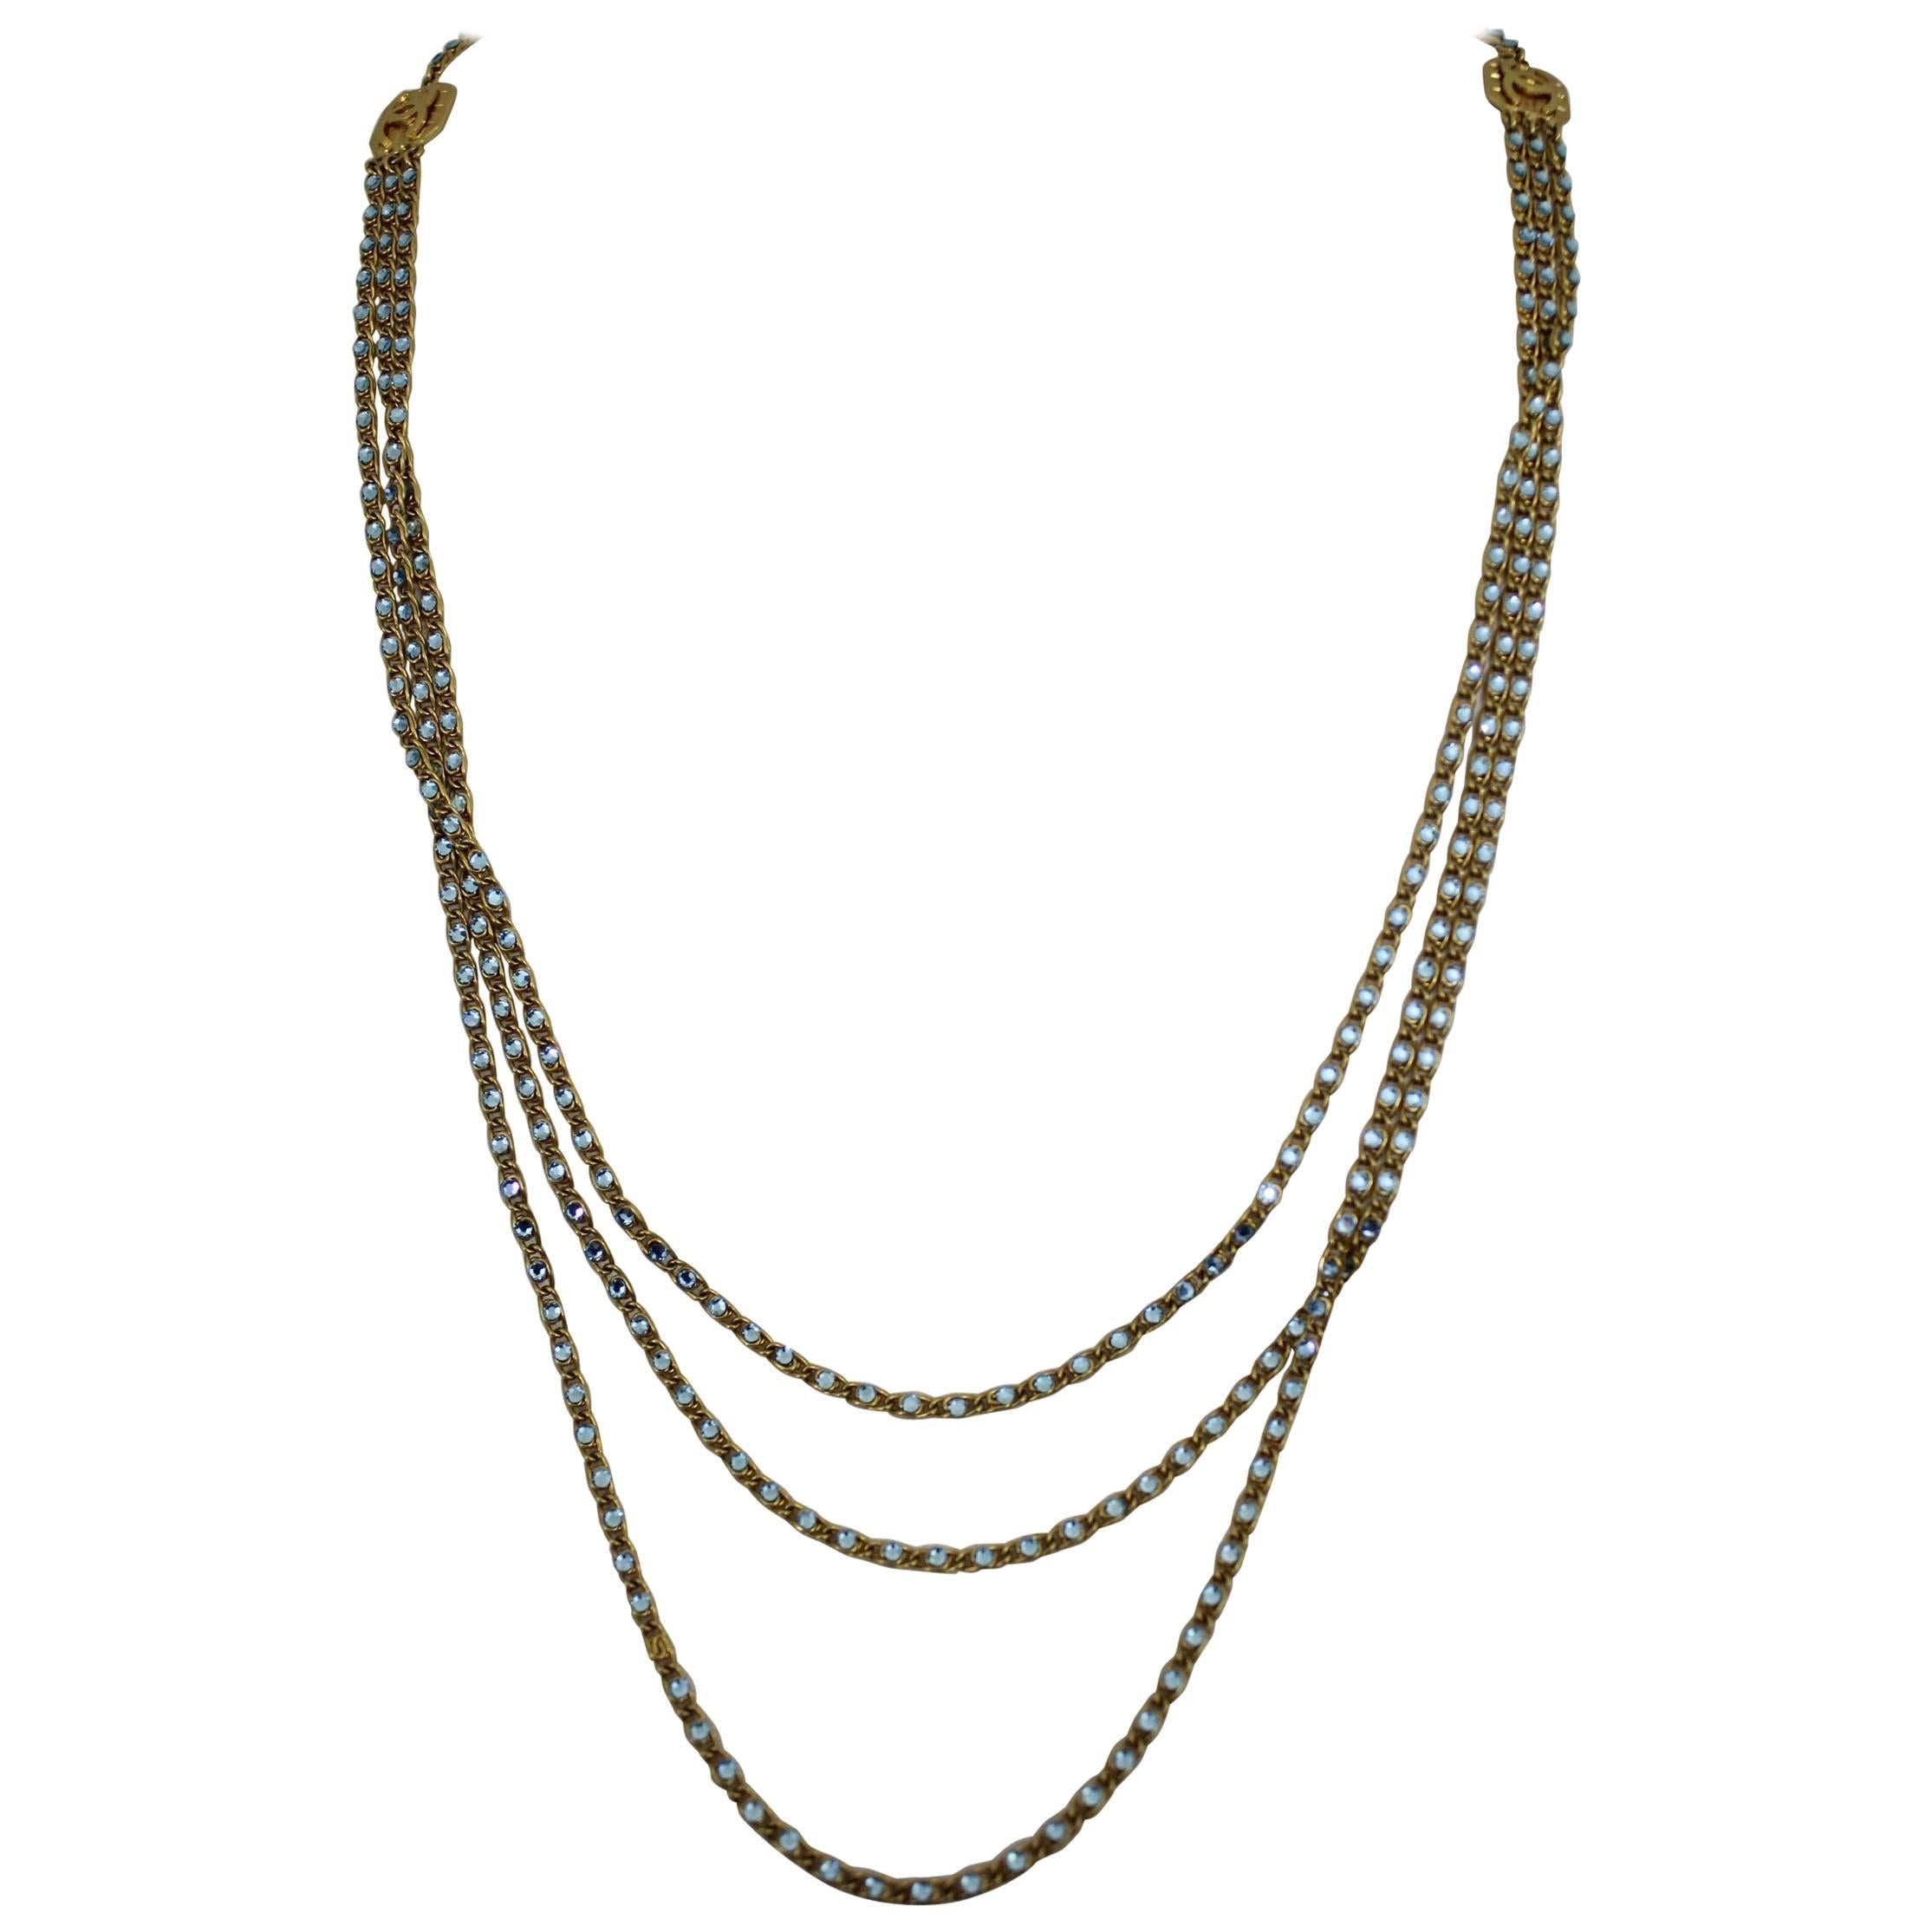 Sophisticated 1997 Chanel Necklace with blue stones and gold plated metal.